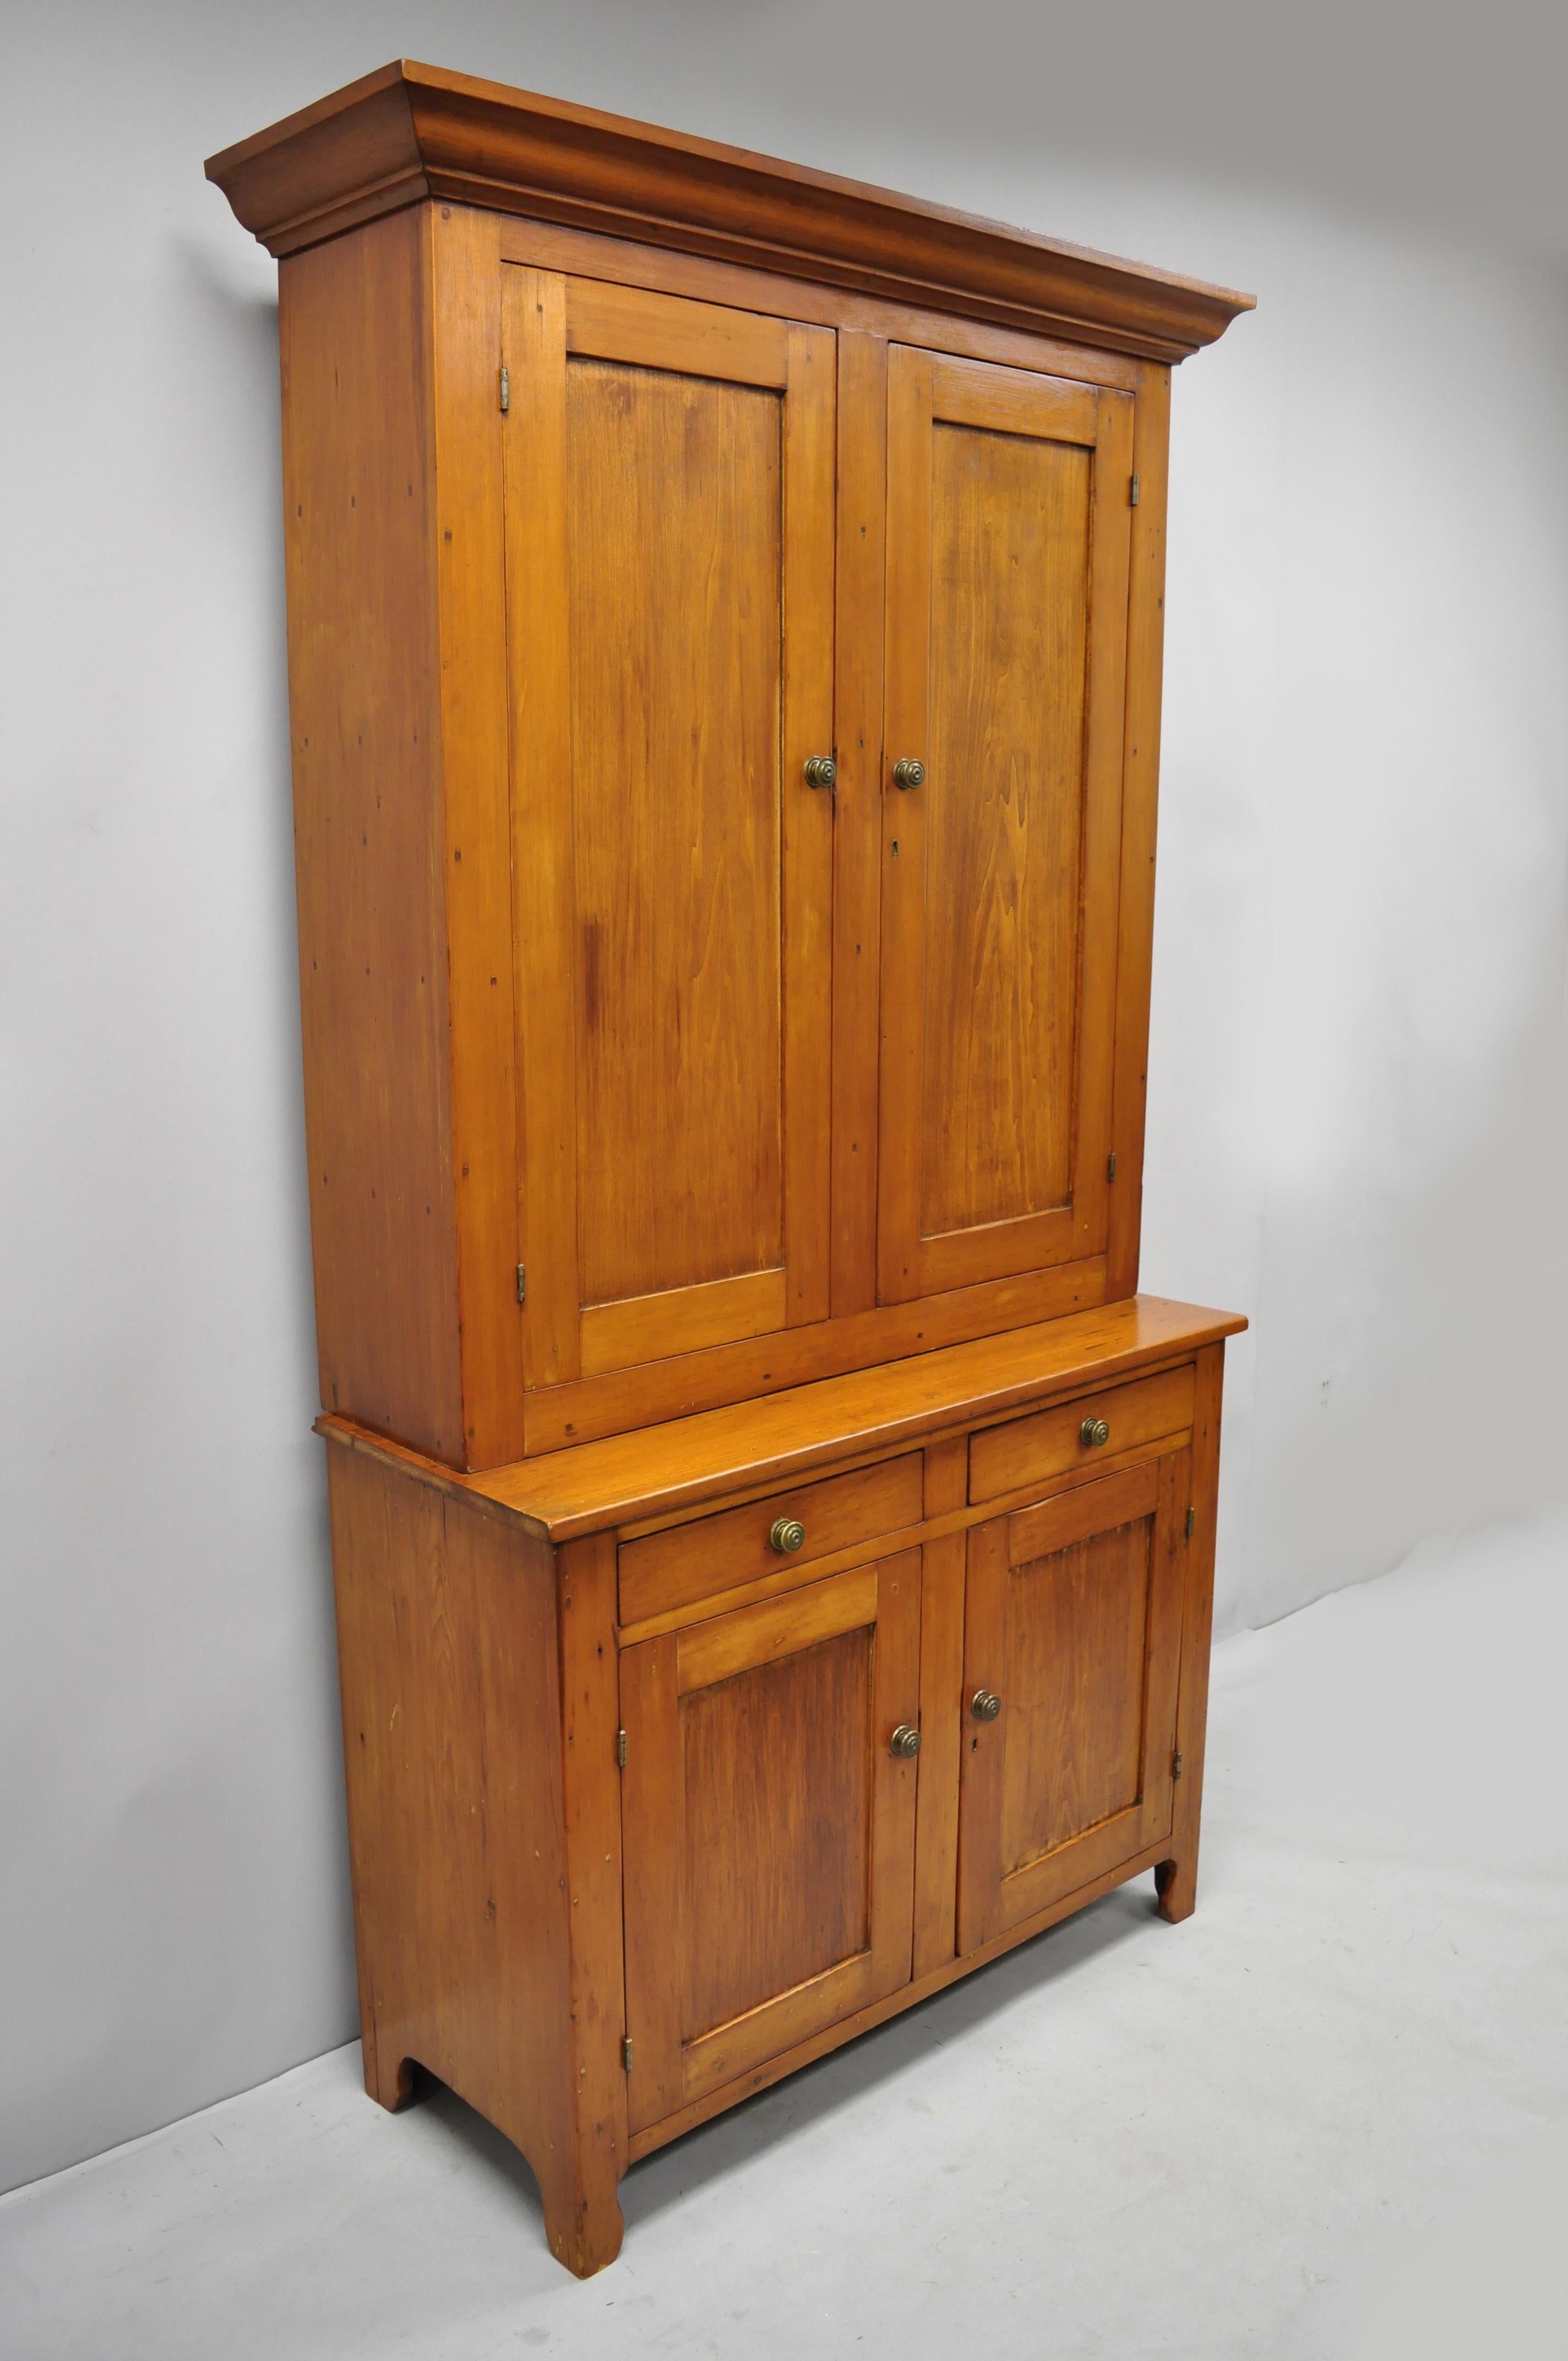 Tall 19th century pine wood blind doors step back cupboard hutch cabinet. Listing includes blue painted interior, solid wood construction, beautiful wood grain, 2 part construction, 4 swing doors, 2 dovetailed drawers, solid brass hardware, very